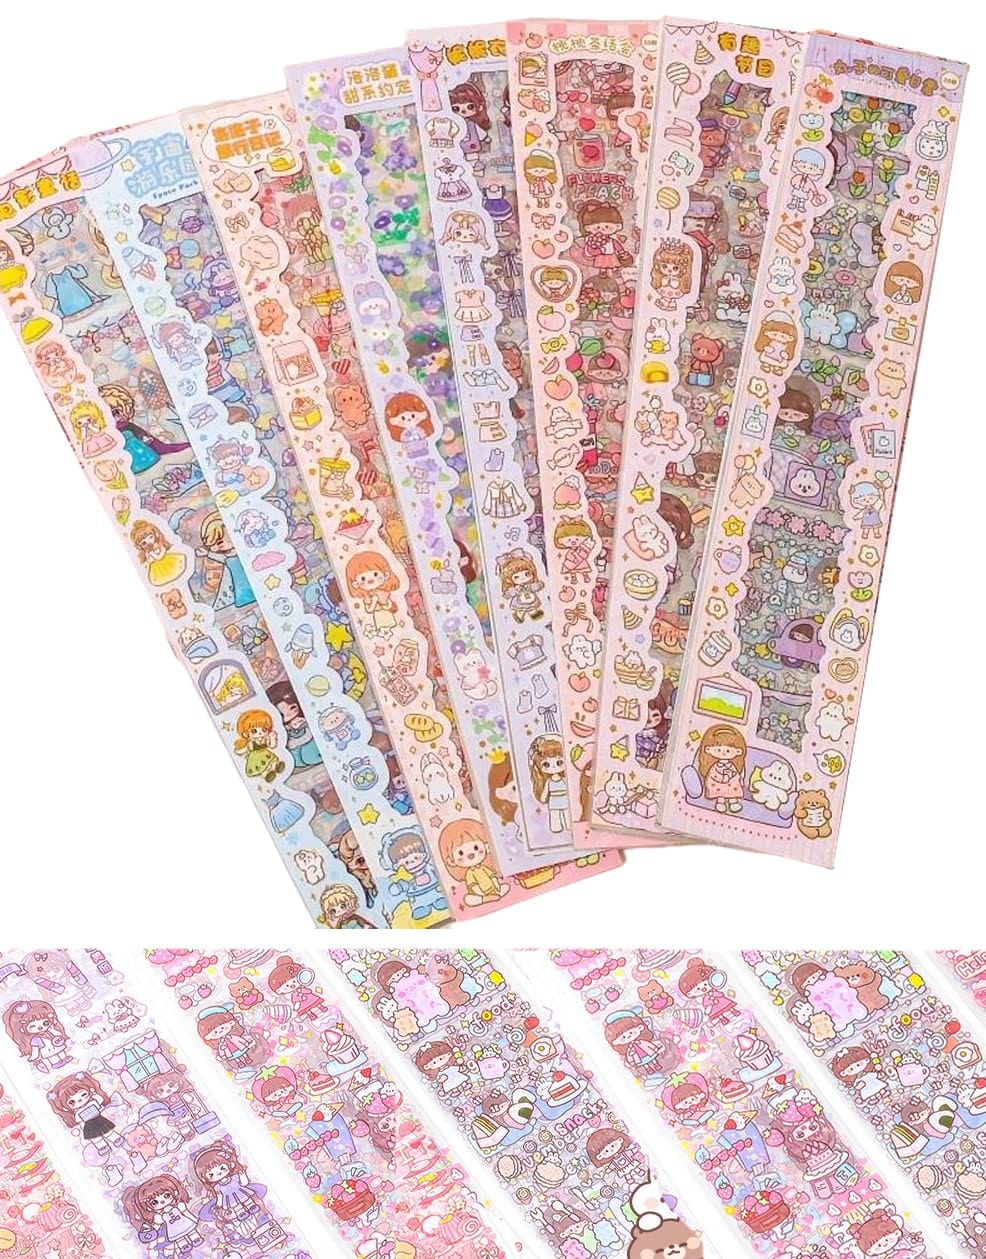 Sun international Cute Cartoon Theme Kawaii Stickers - 40 PET Sheets Cute Washi Stickers for Project, Japanese Style Girls Sticker Set, Size of Each Sheet - 40 X 8 CM (Color and Design May Vary)